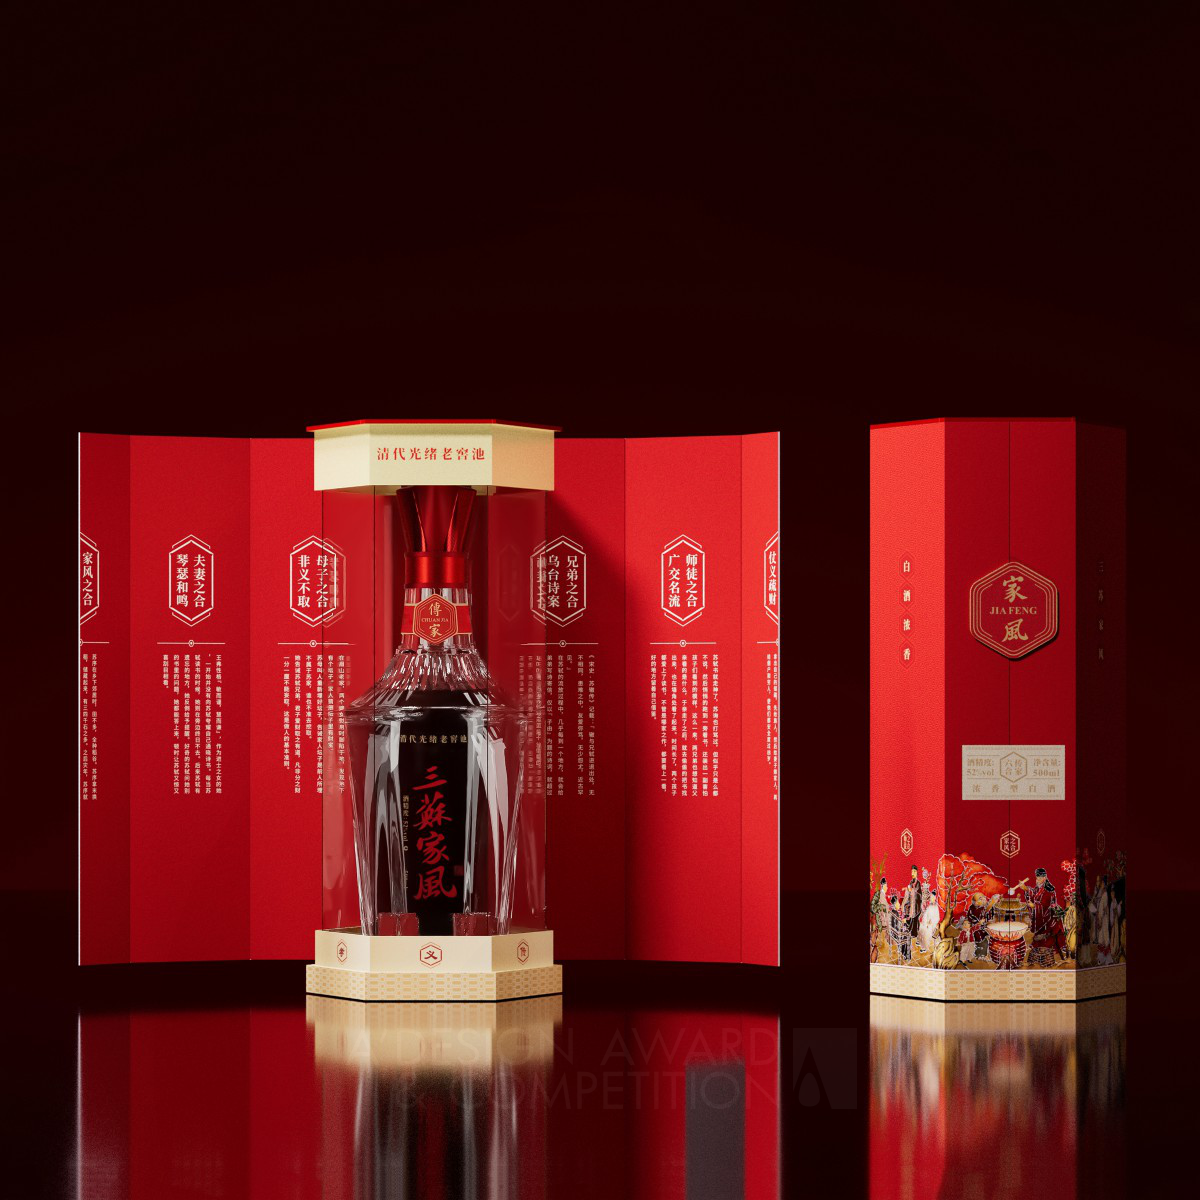 Ruohan Li wins Silver at the prestigious A' Packaging Design Award with Inheritance Chinese Liquor Packaging.